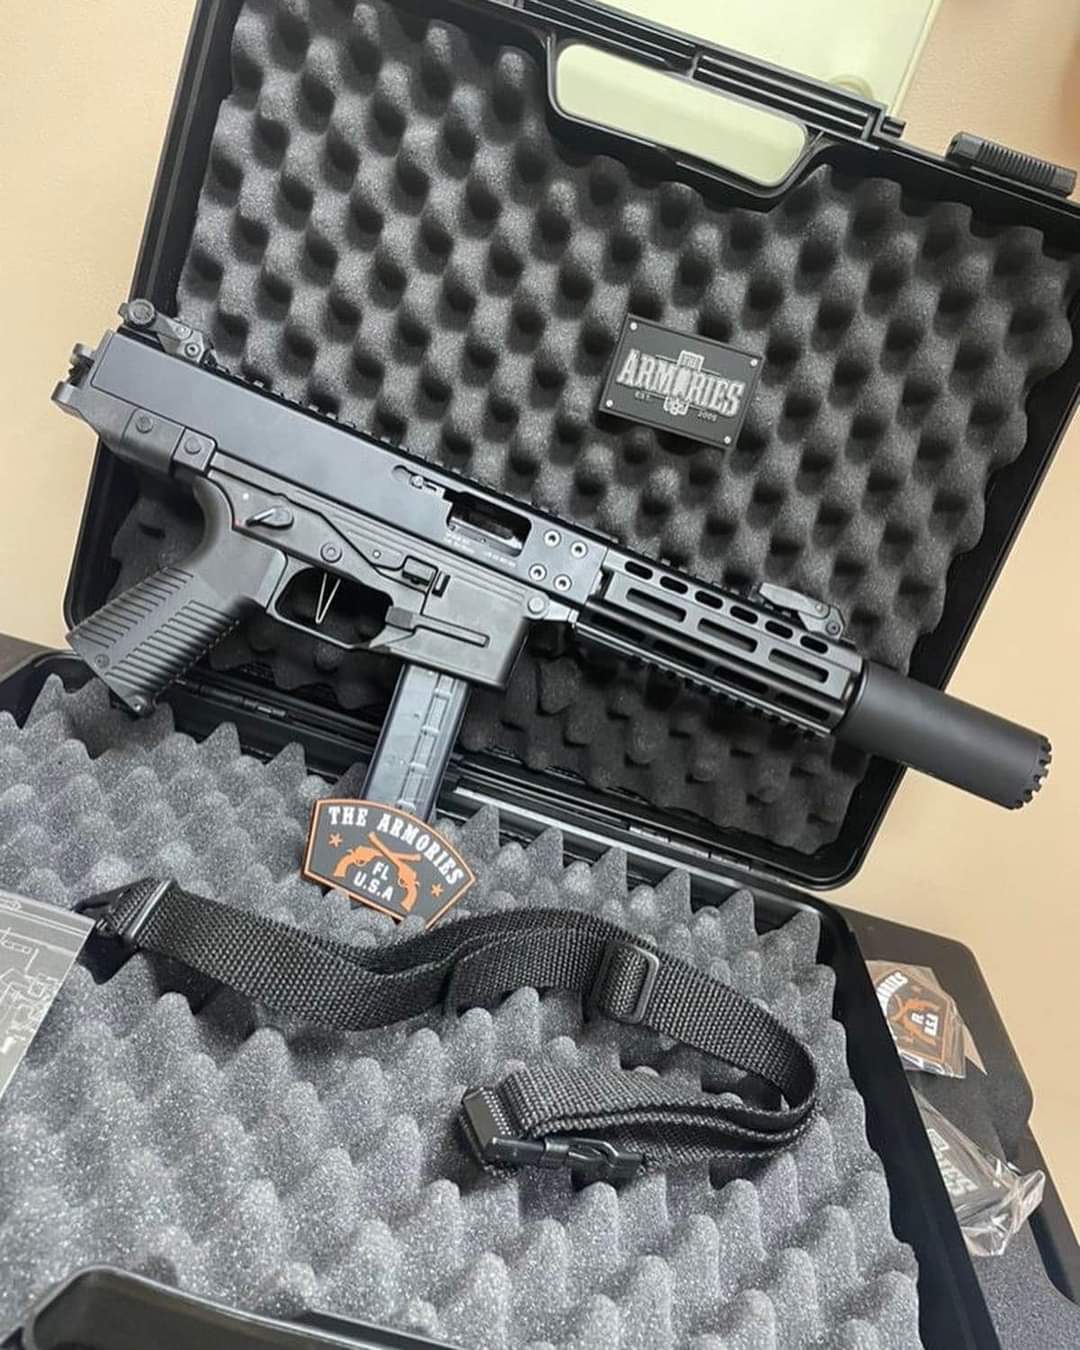 B&T USA Delivers Exclusive GHM9 SD Model to The Armories